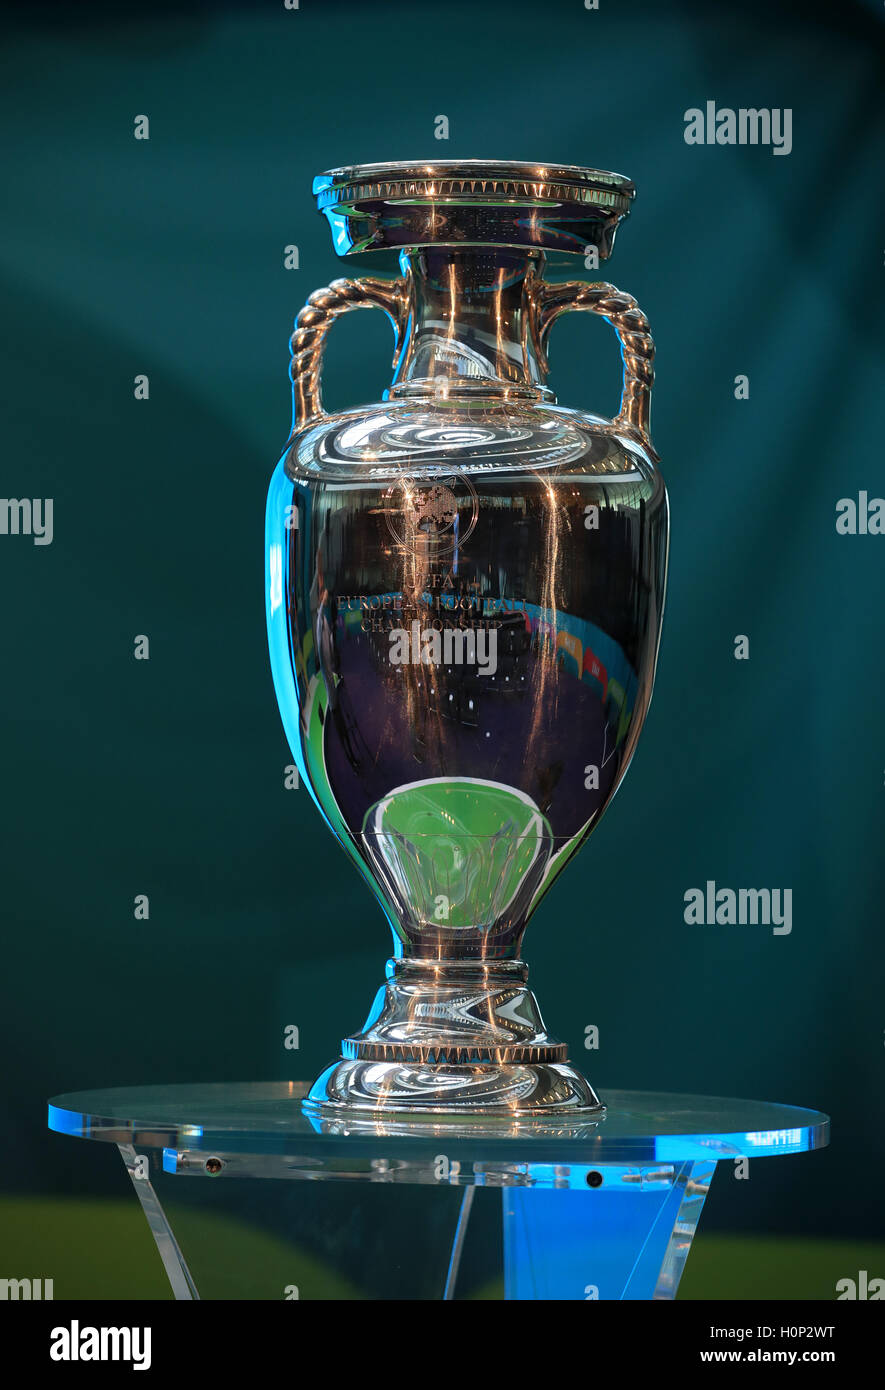 The UEFA Euro 2020 trophy before the start of the UEFA ...